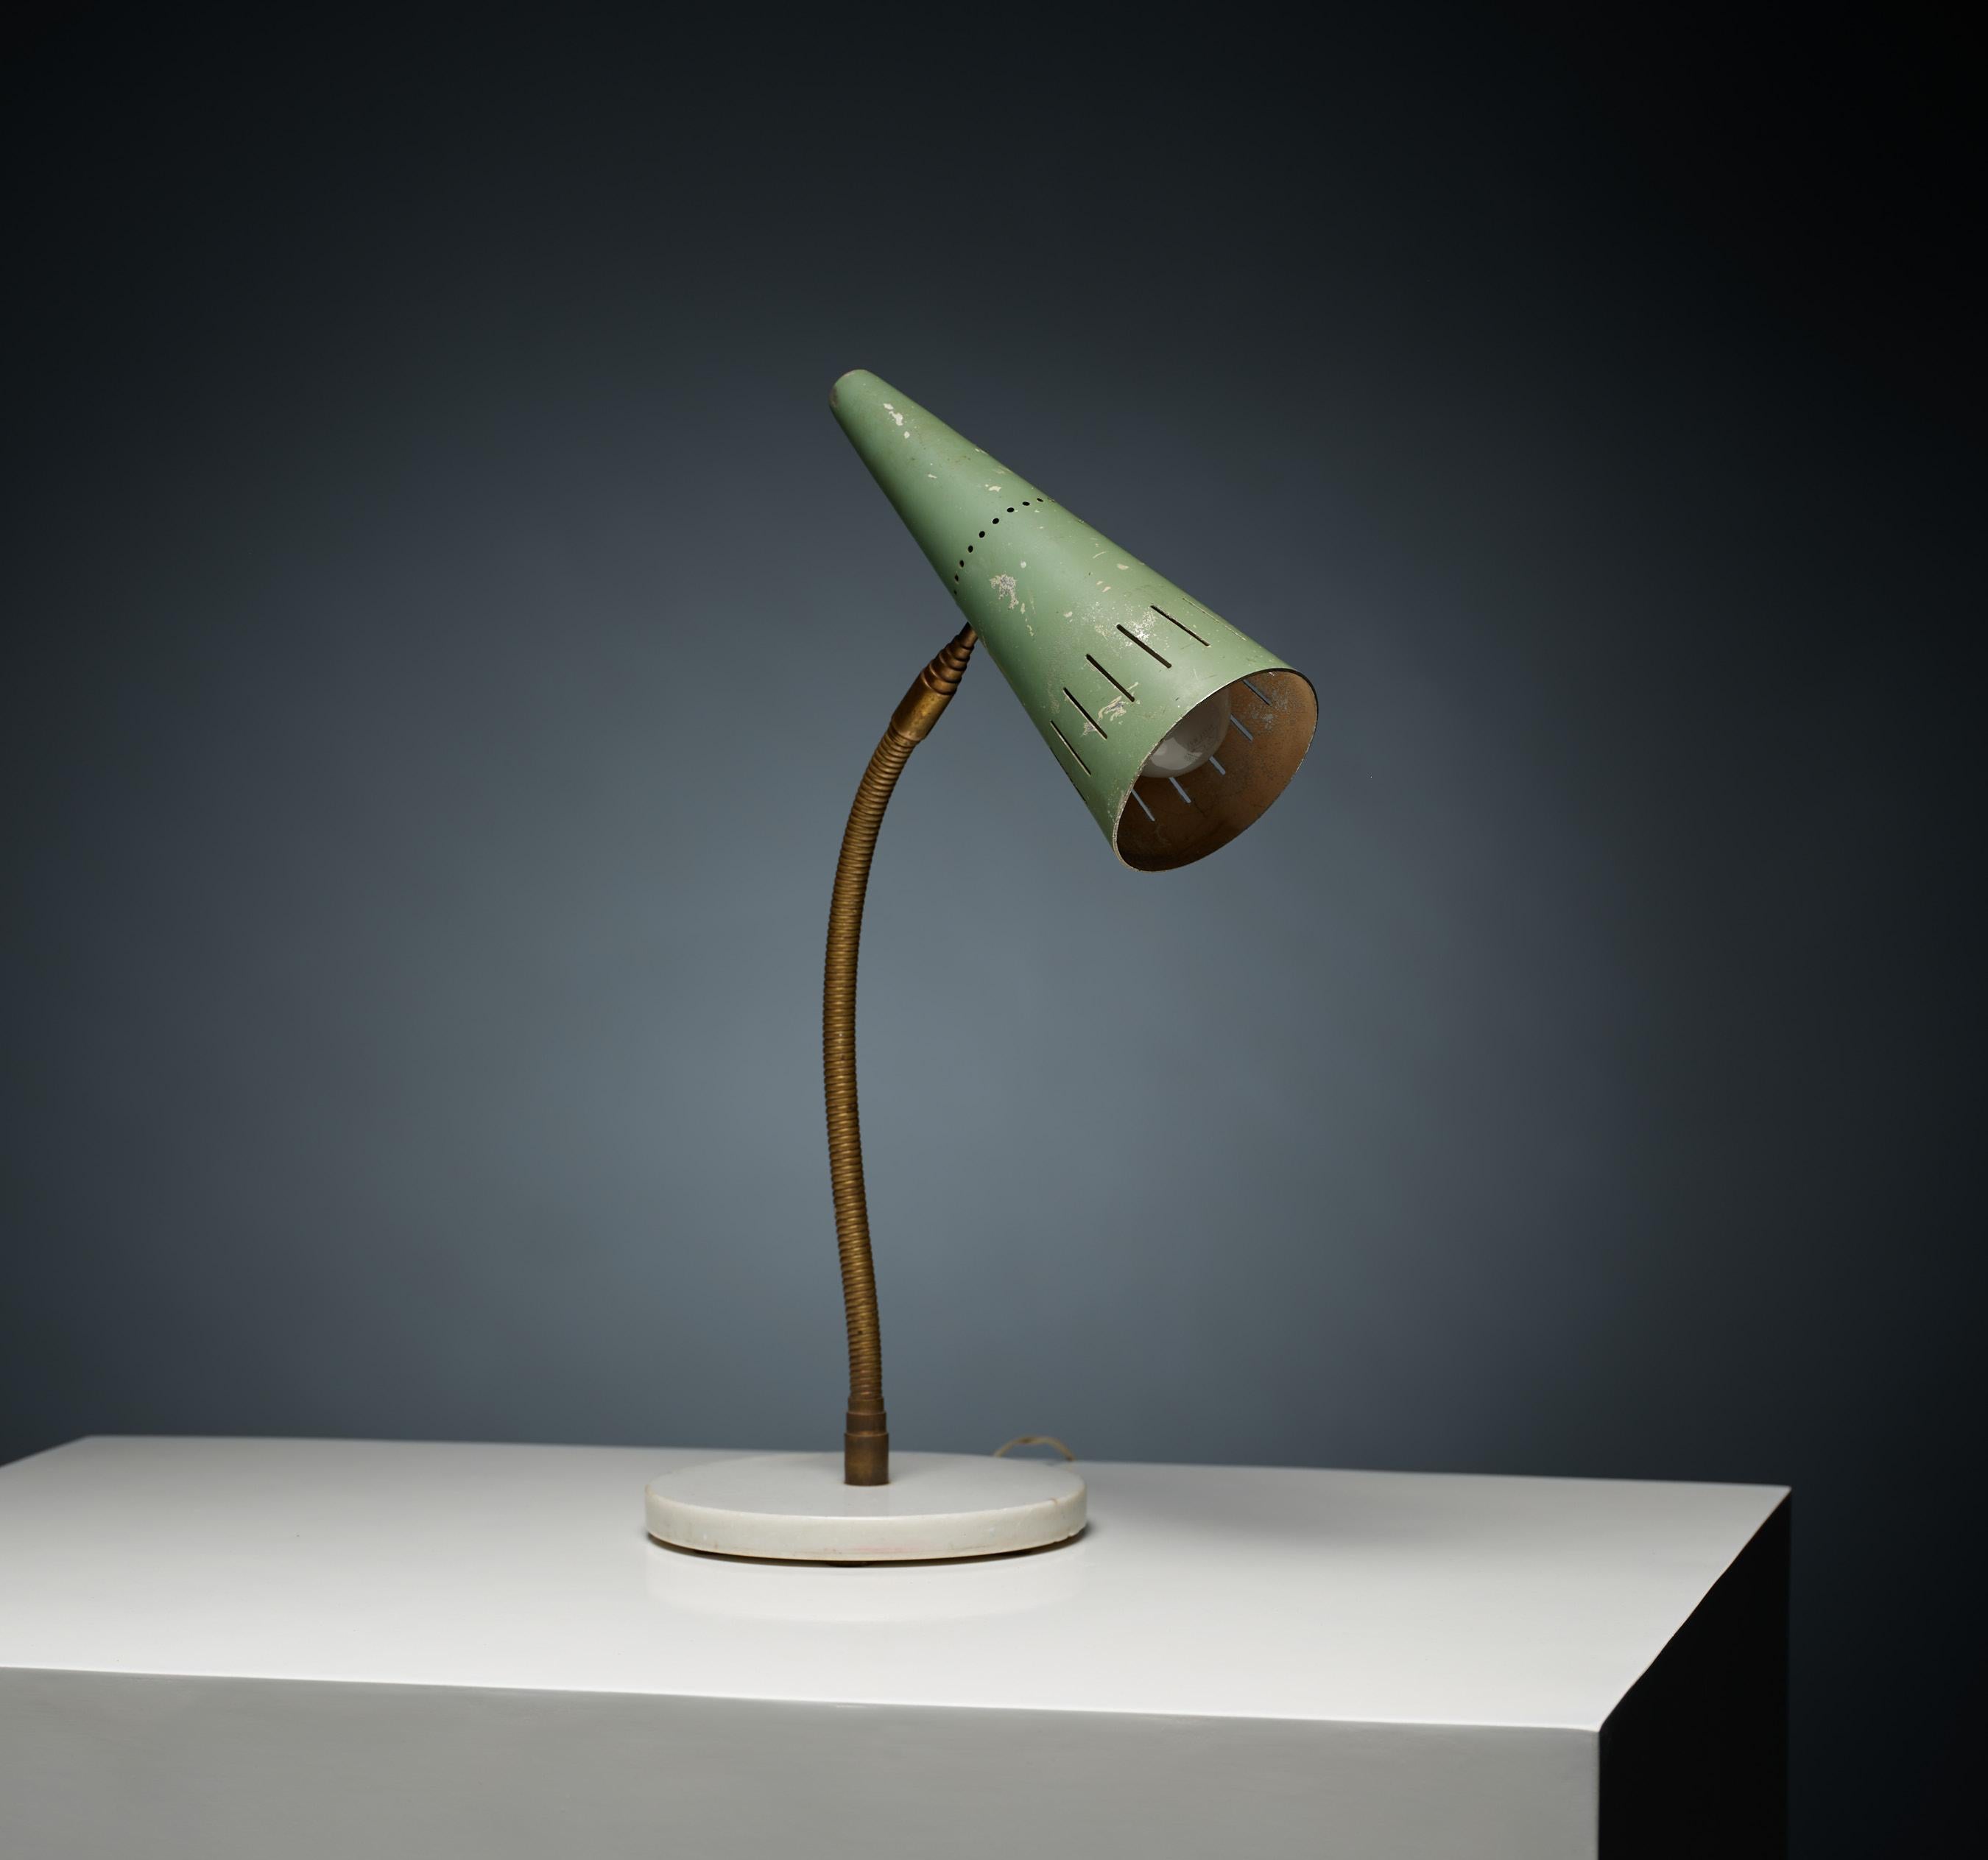 Vintage Italian Table Lamp - 1950s Design with Green Lacquered Metal Shade 3